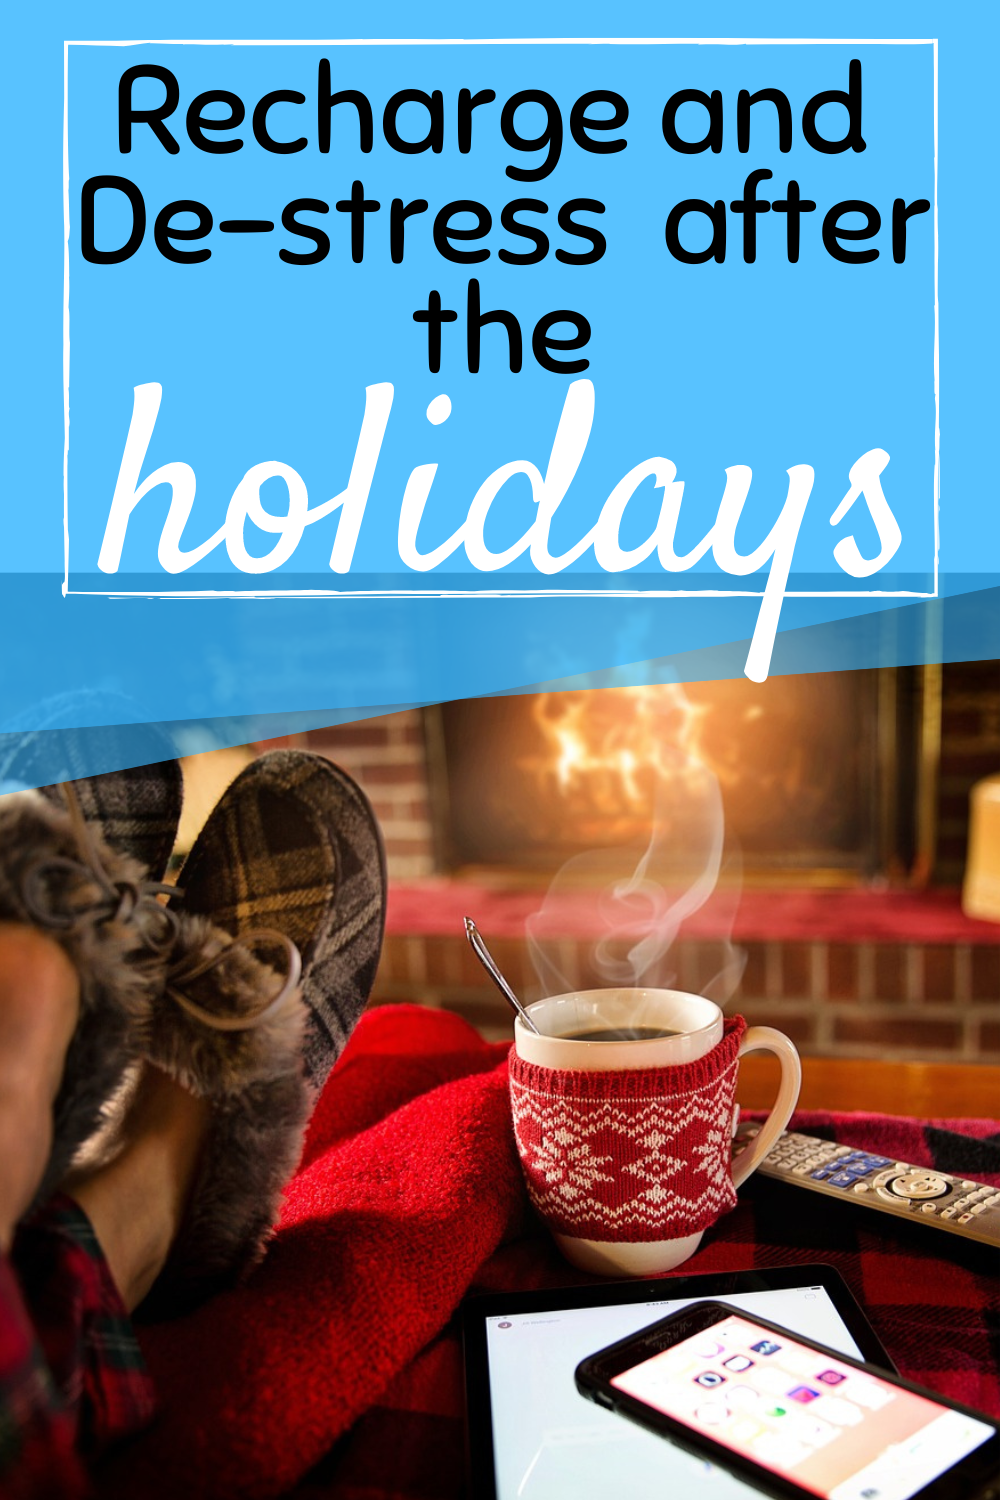 recharge and de-stress after the holidays - person with feet up in front of a fireplace with a hot cup of coffee